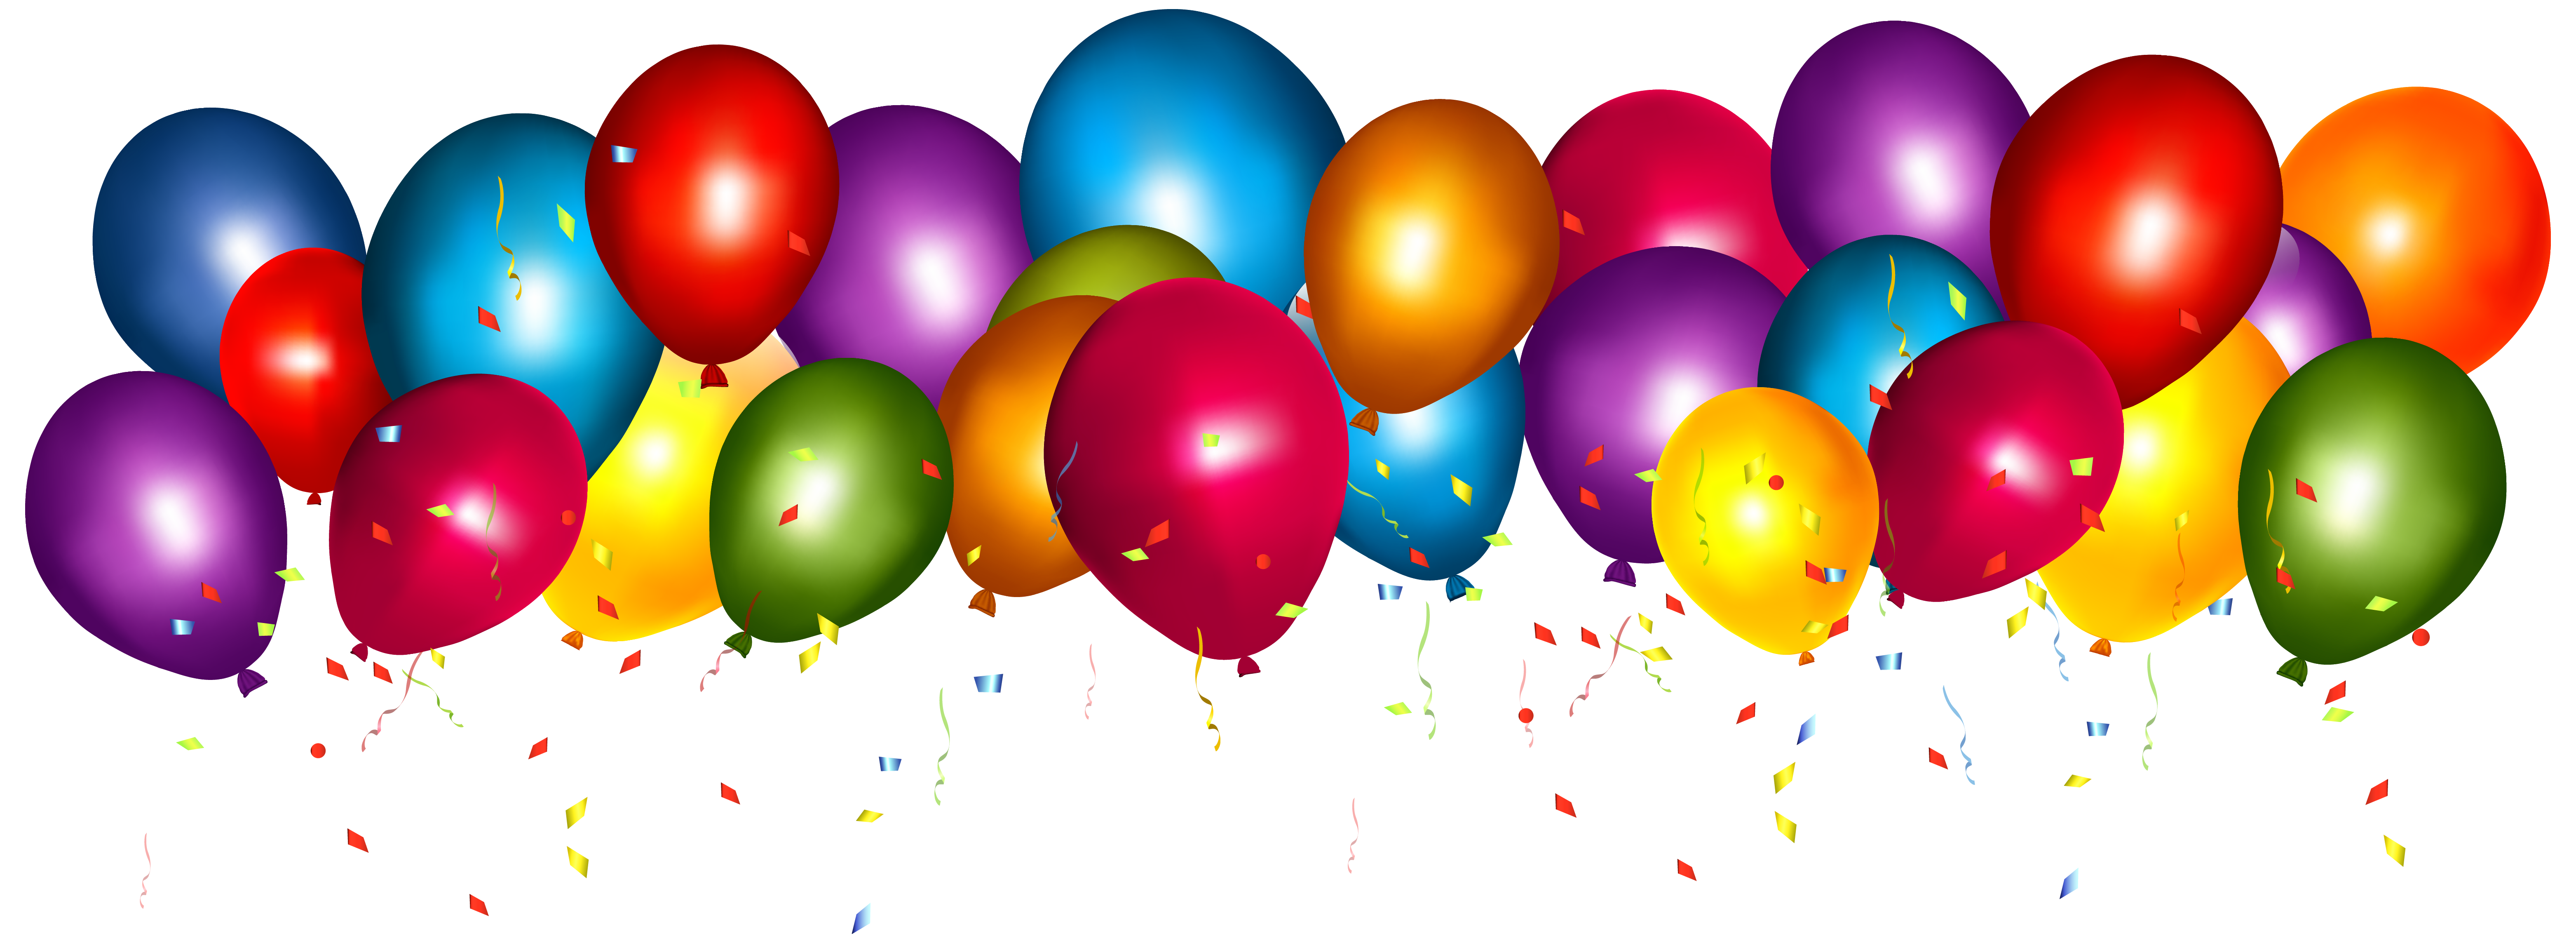 balloons and confetti clipart - photo #30